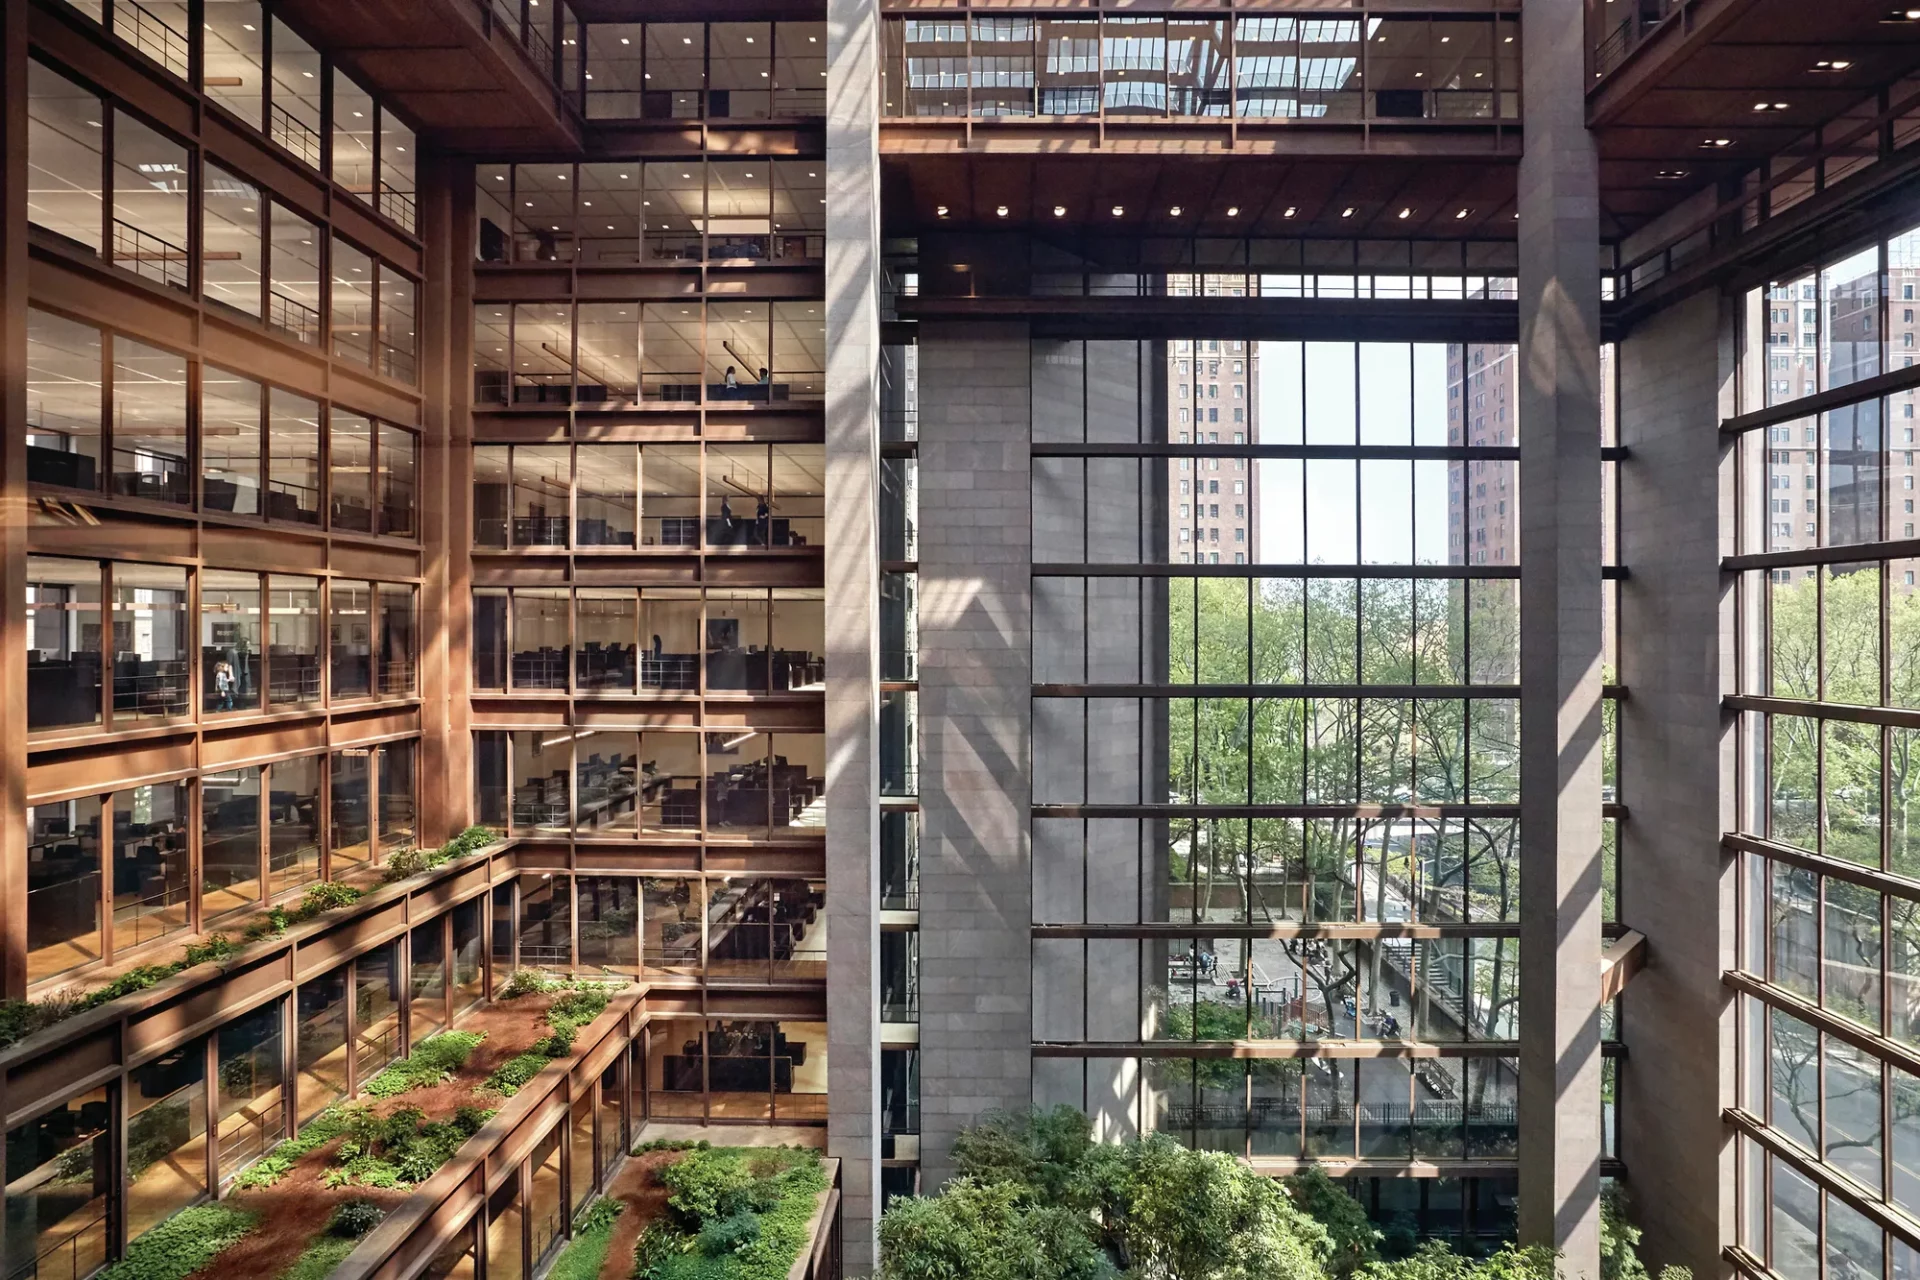 The Ford Foundation Center for Social Justice